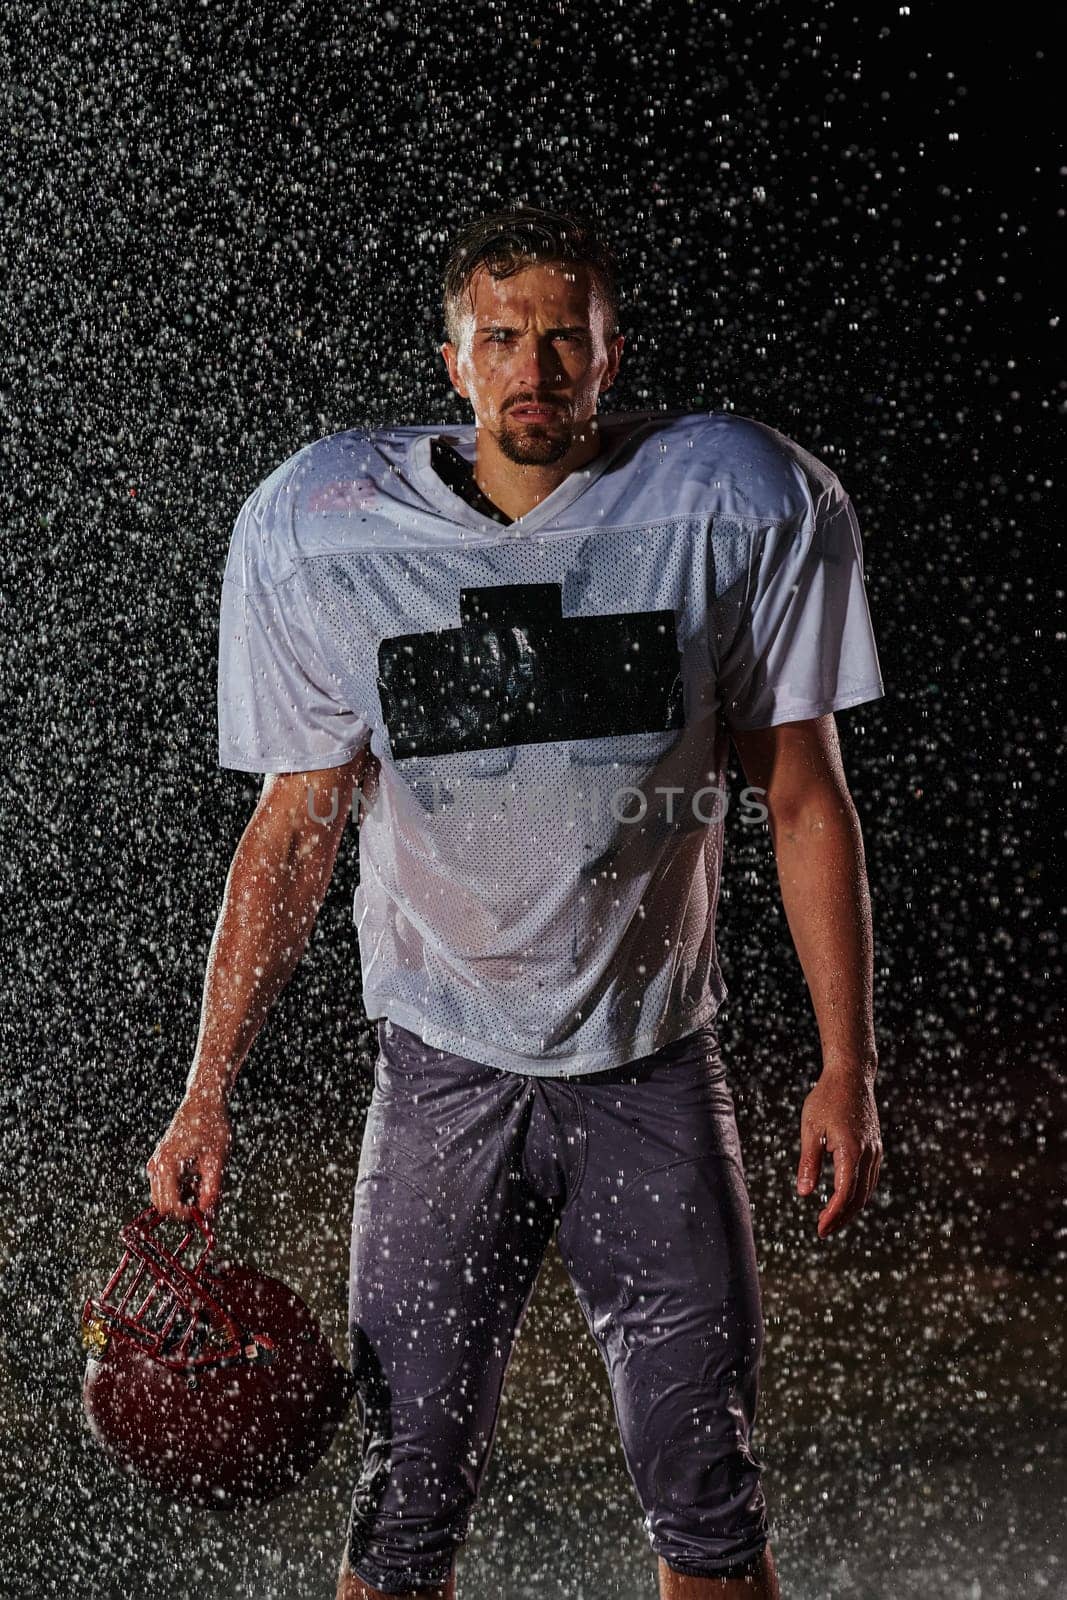 American Football Field: Lonely Athlete Warrior Standing on a Field Holds his Helmet and Ready to Play. Player Preparing to Run, Attack and Score Touchdown. Rainy Night with Dramatic Fog, Blue Light by dotshock